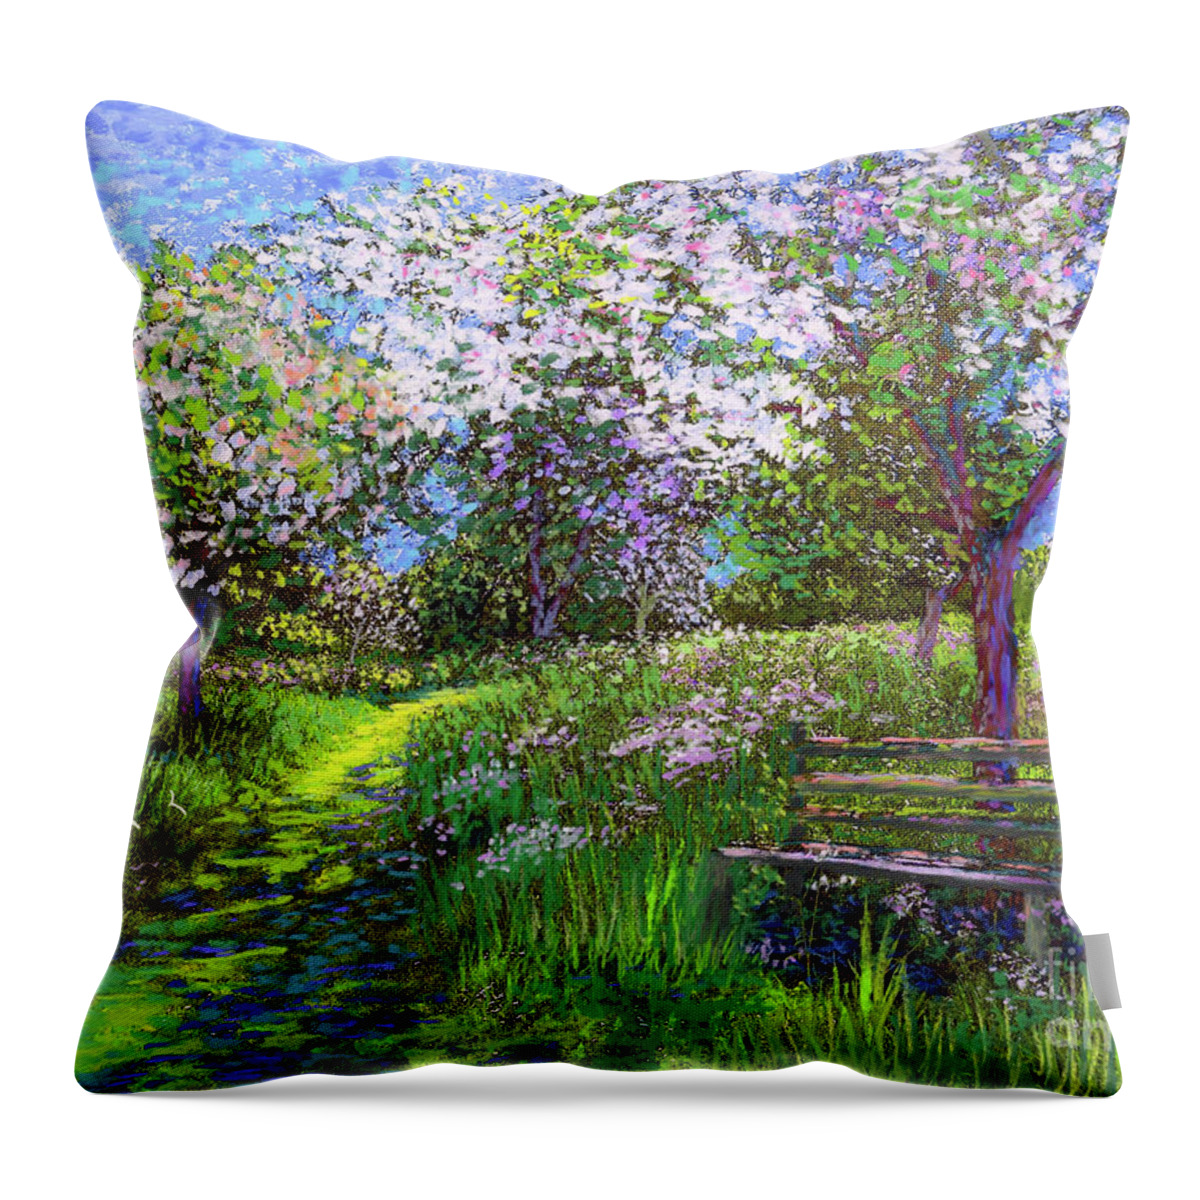 Landscape Throw Pillow featuring the painting Apple Blossom Trees by Jane Small